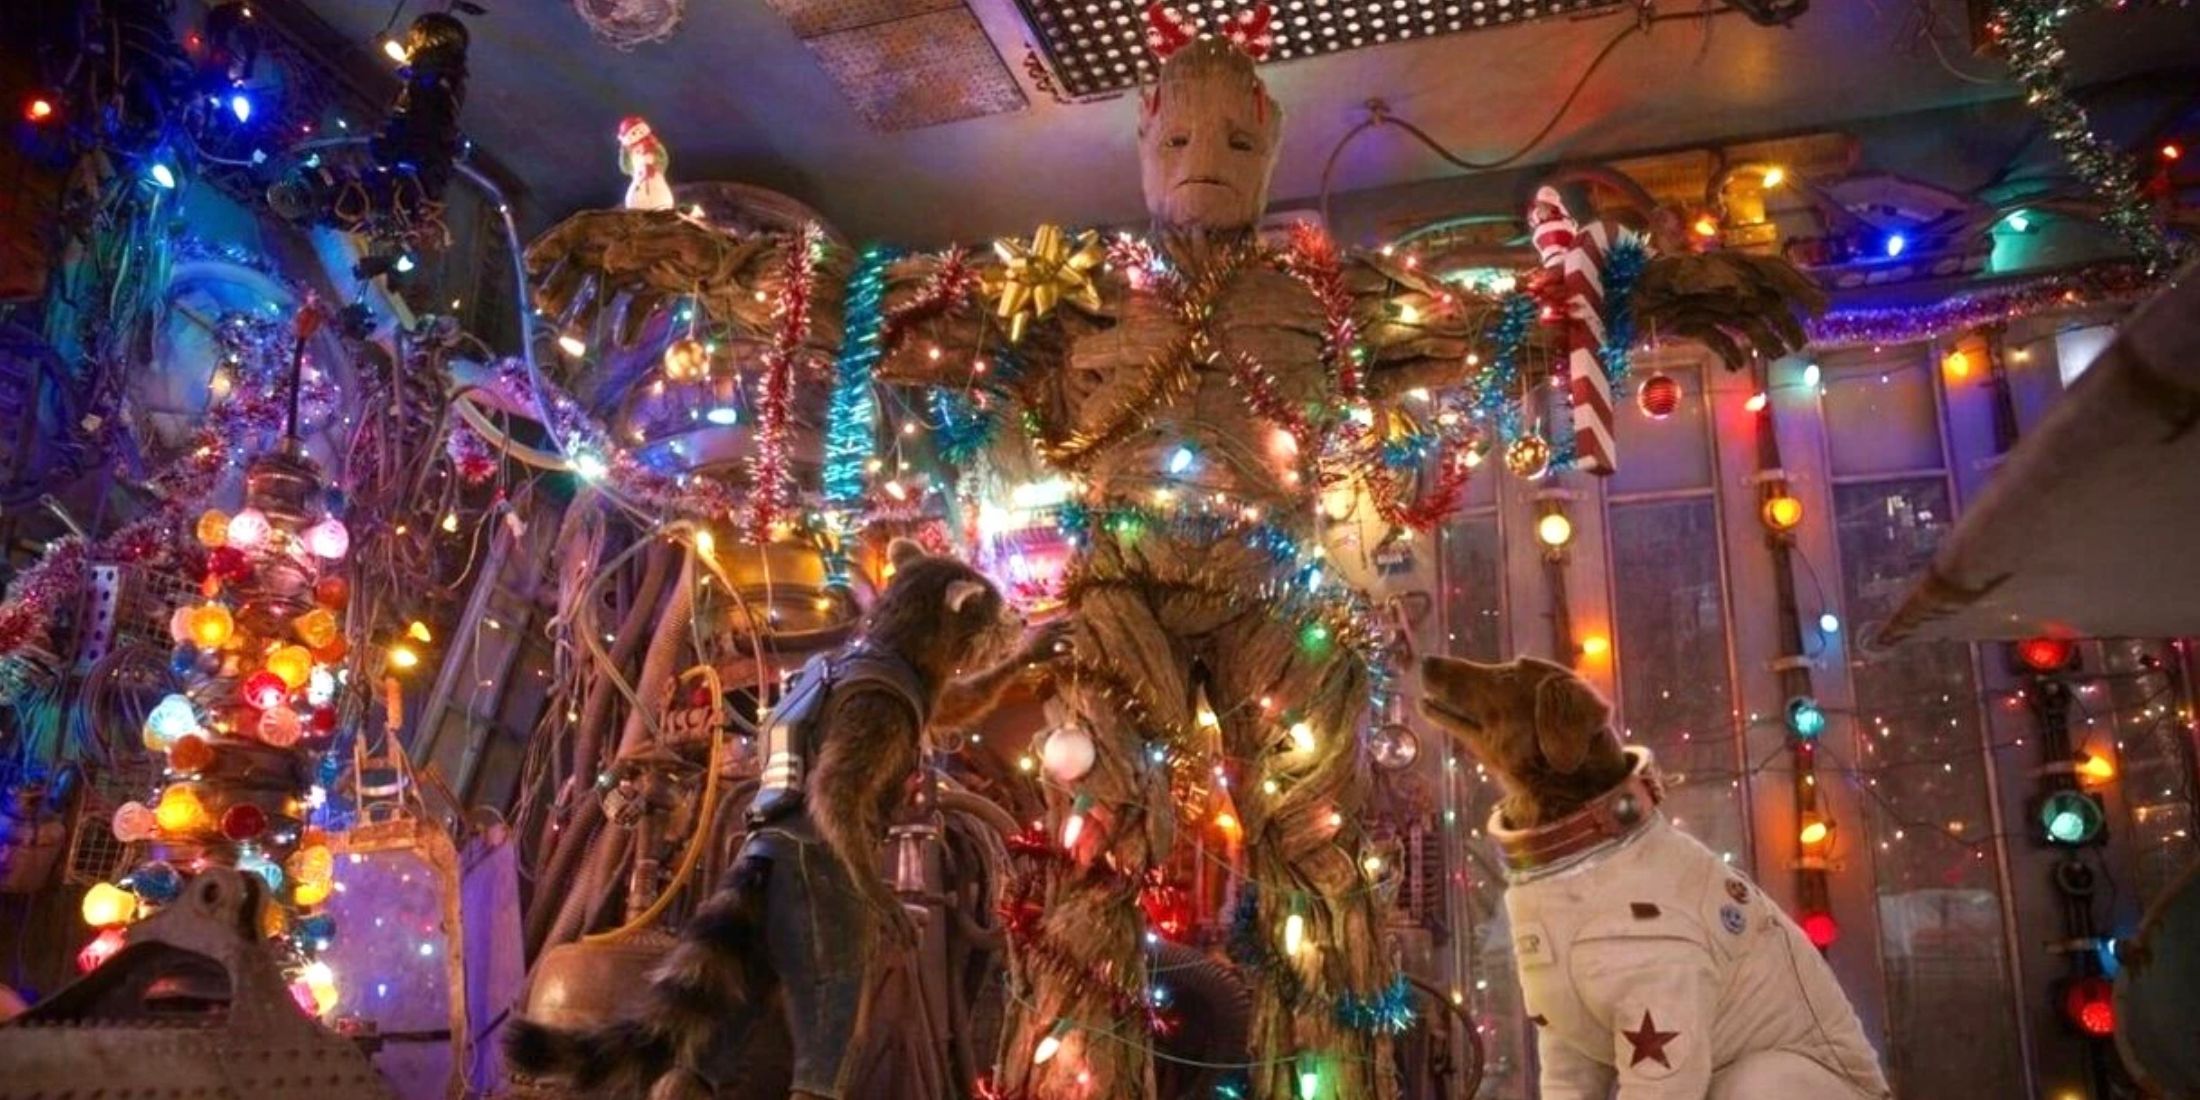 Rocket and Cosmo decorating Groot with ornaments and lights in Guardians of the Galaxy Christmas special